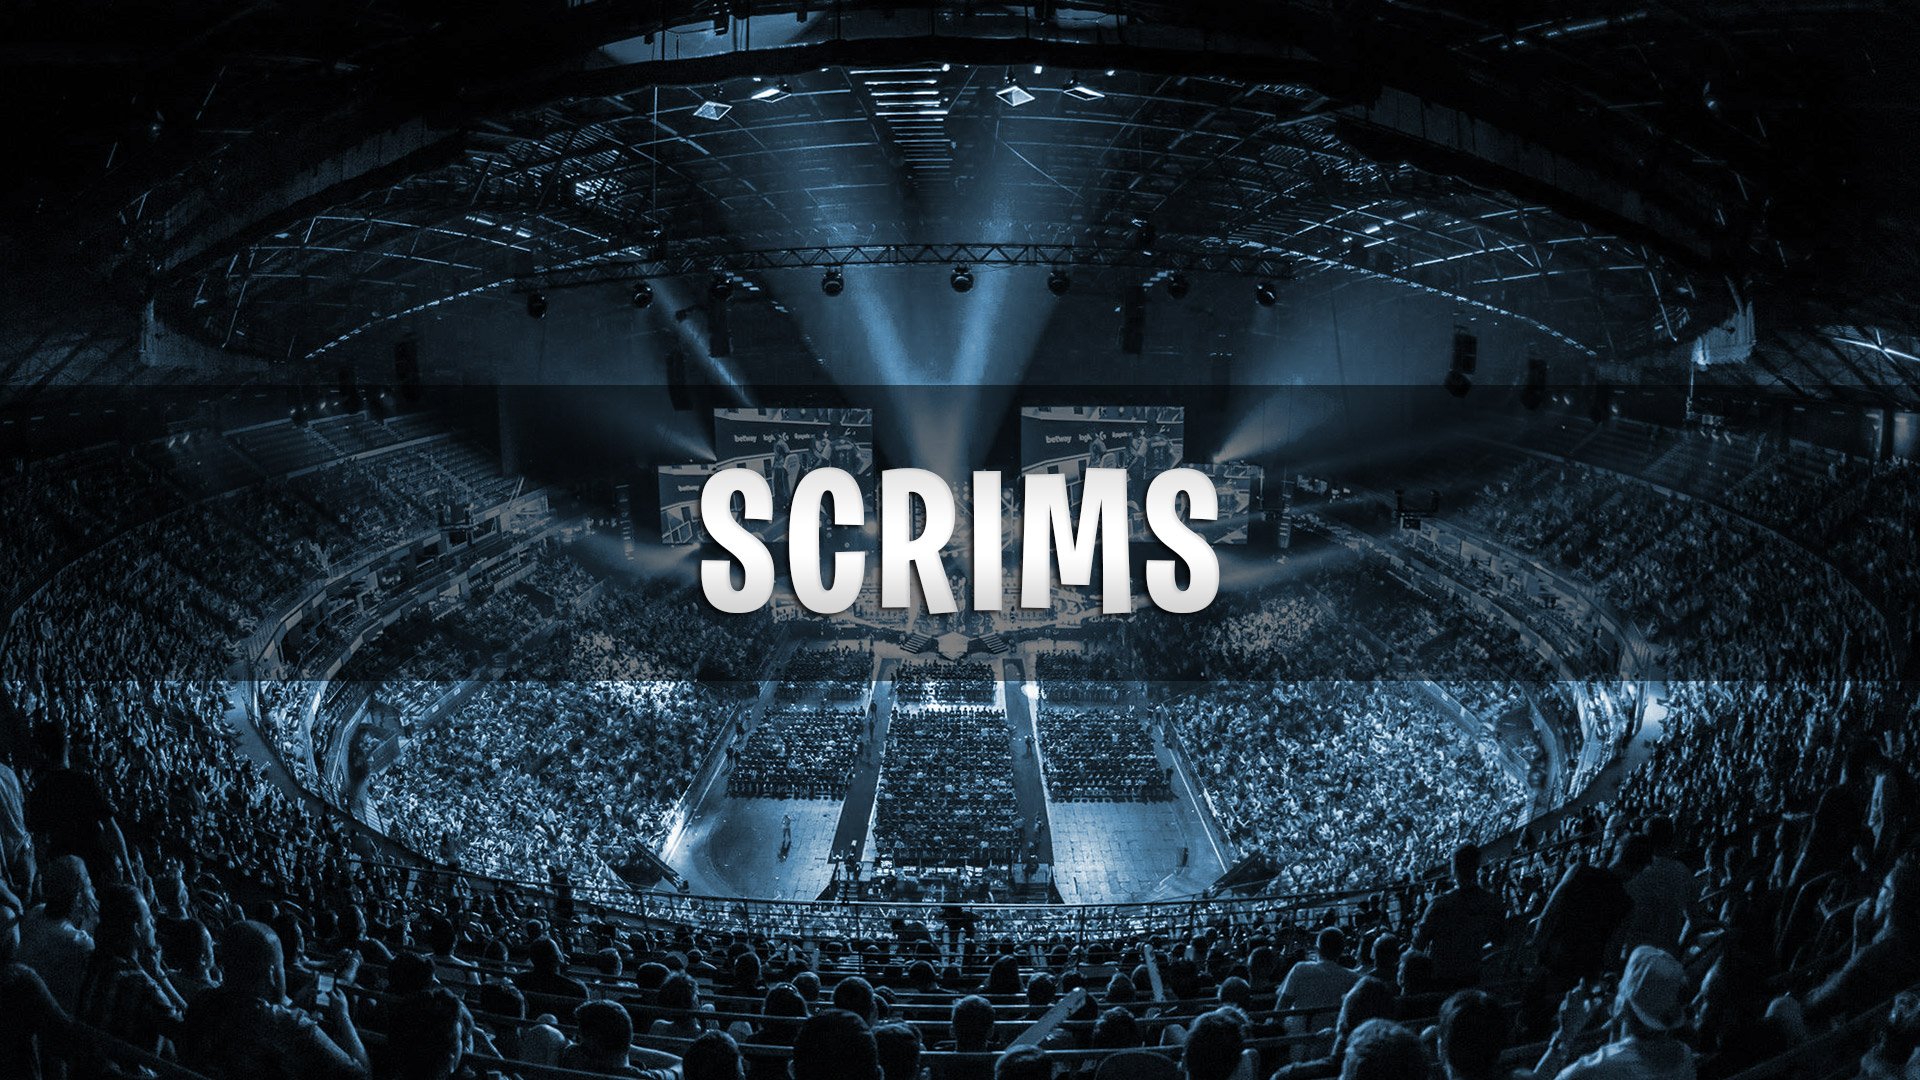 Fortnite Pro Squad Scrims Times Scrims Pro Scrims What Is It And How To Join Scrims Yogaming Com